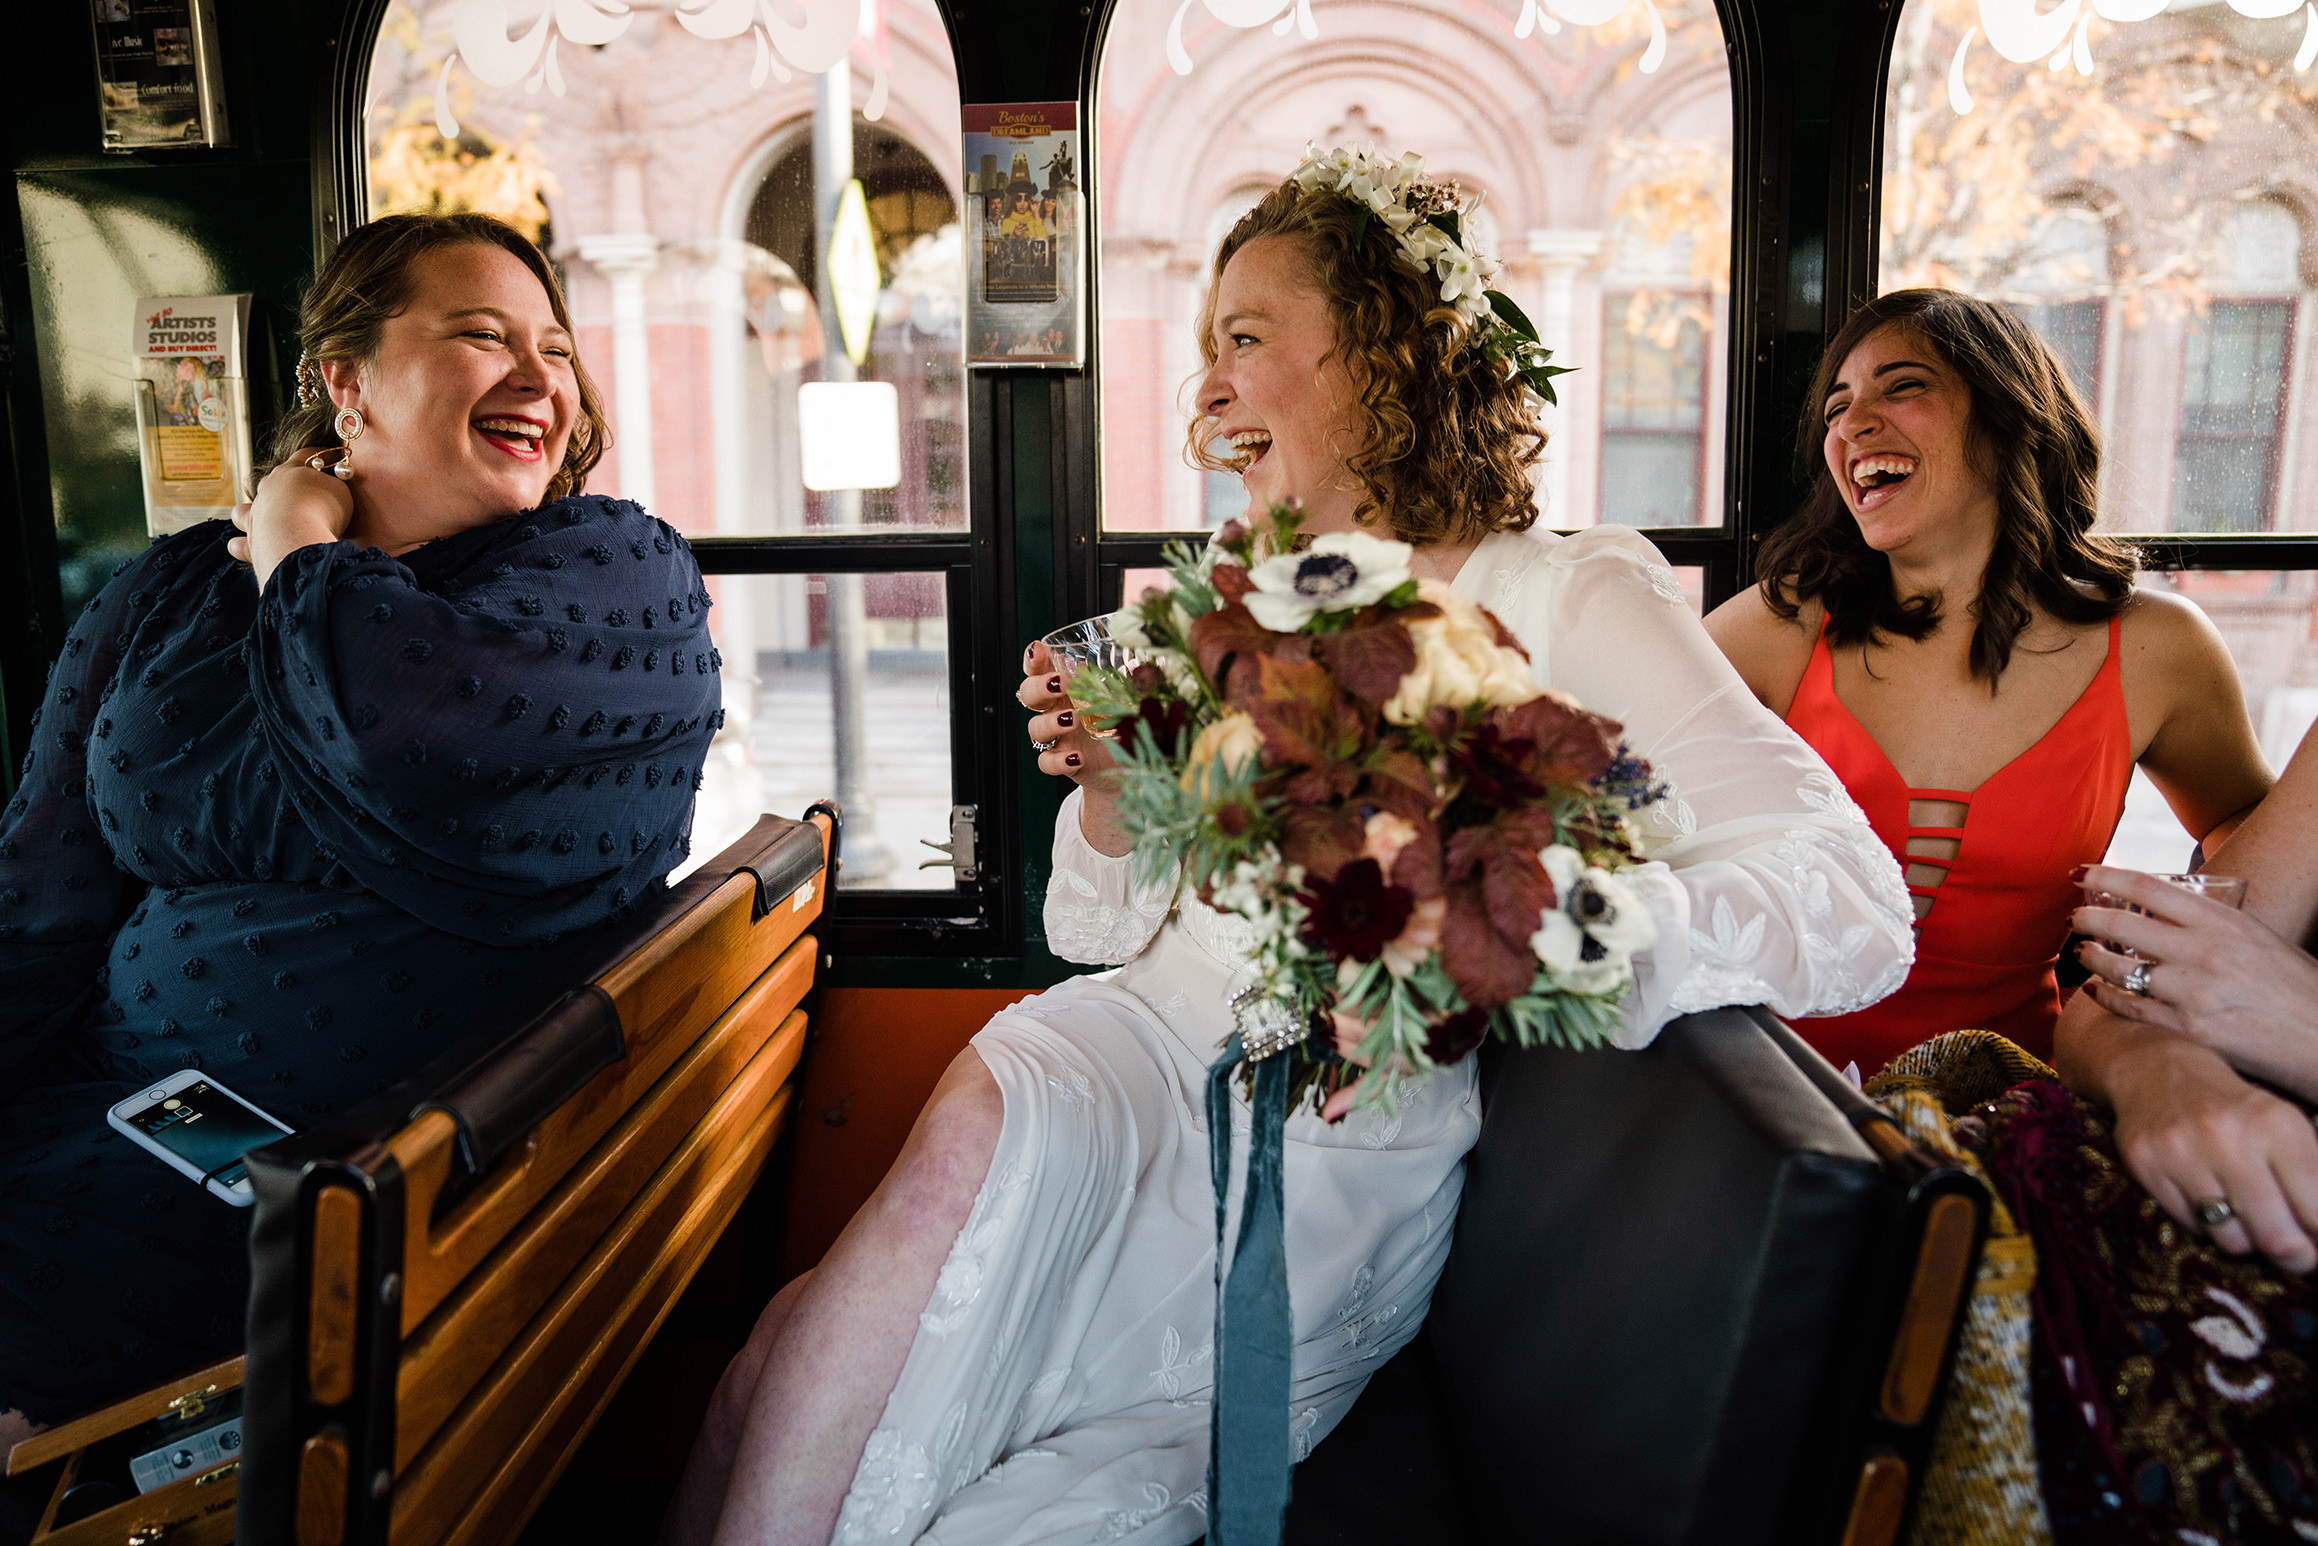 A documentary photograph featured in the best of wedding photography of 2019 showing a bride and her friends laughing on a trolley on the way to their wedding ceremony